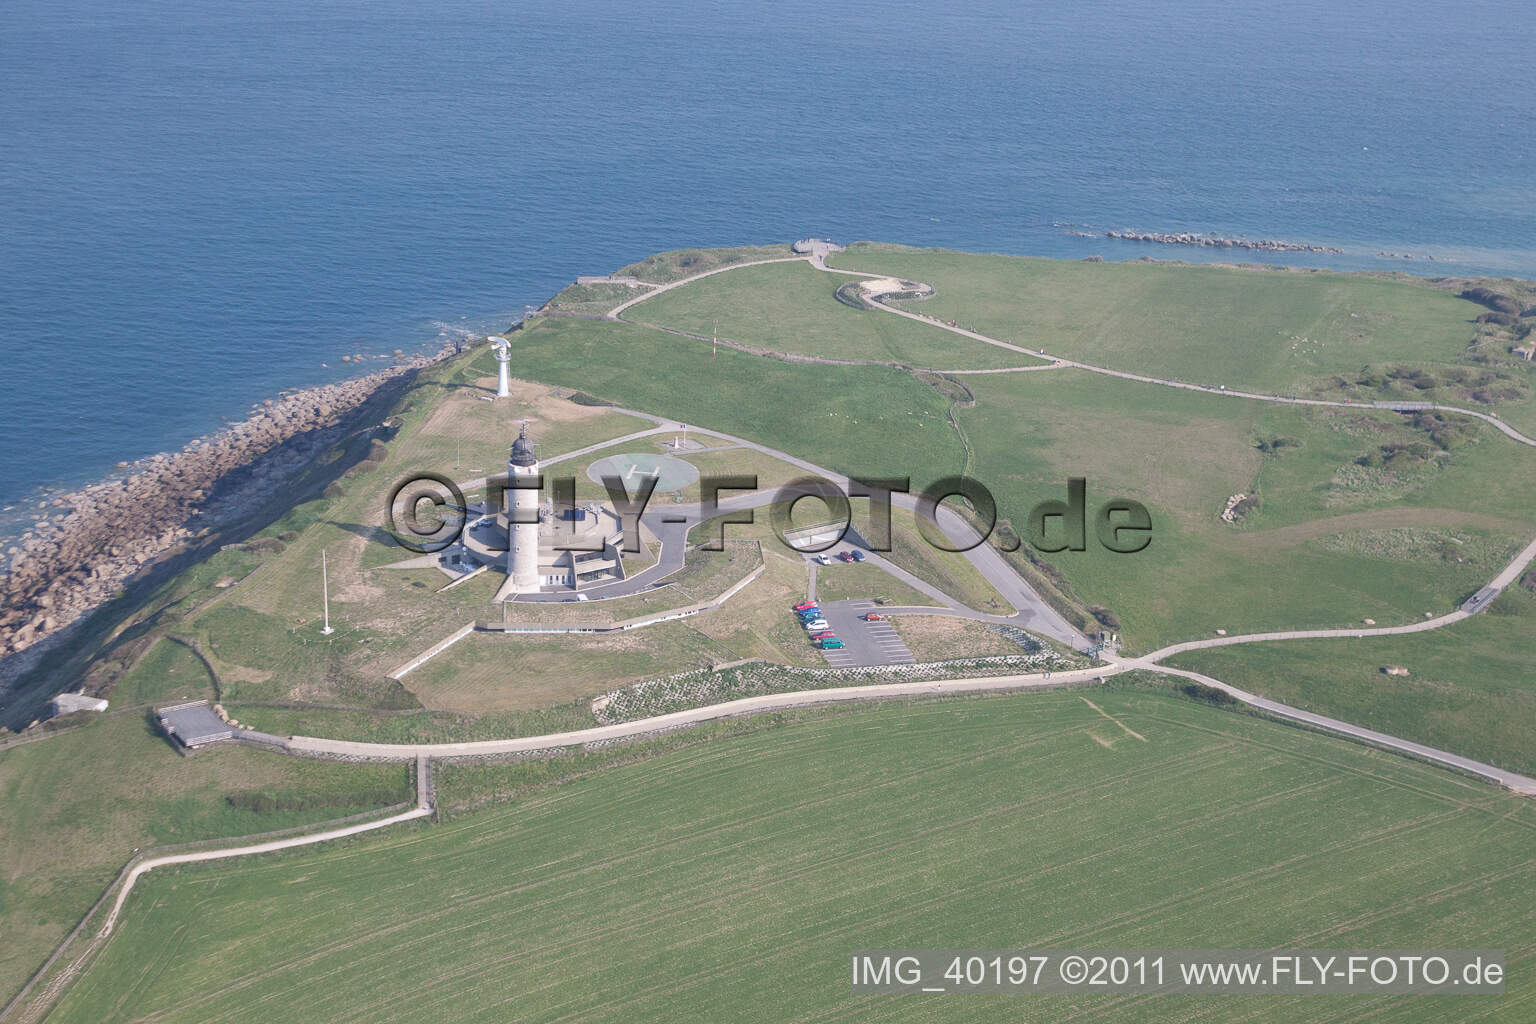 Aerial photograpy of French coast of the channel Cap Le Gris Nez in Lille in Nord-Pas-de-Calais Picardy, France